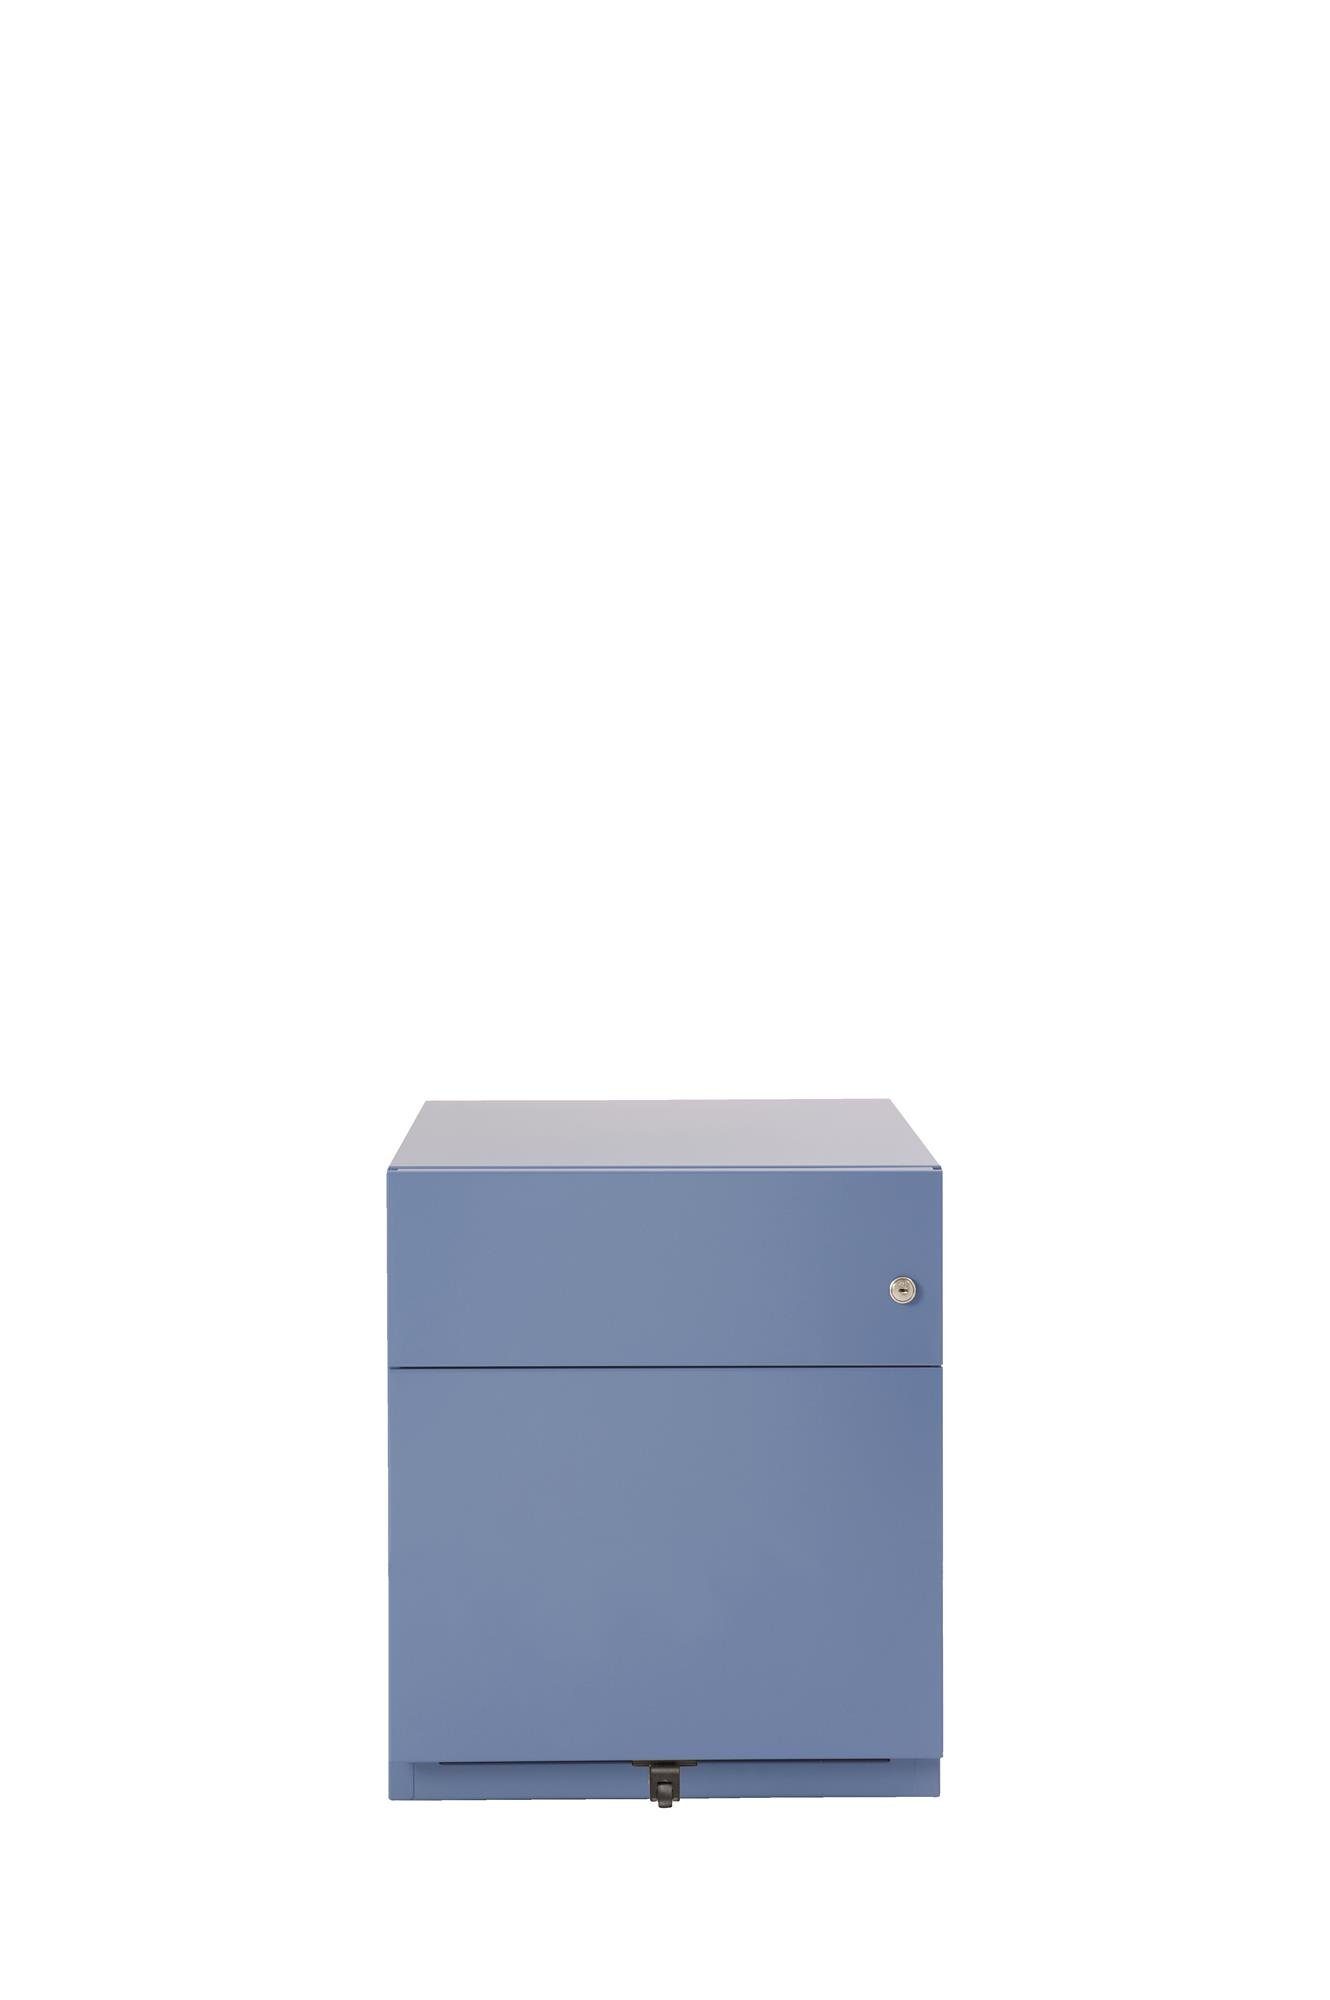 Bisley Container Note 605 blau